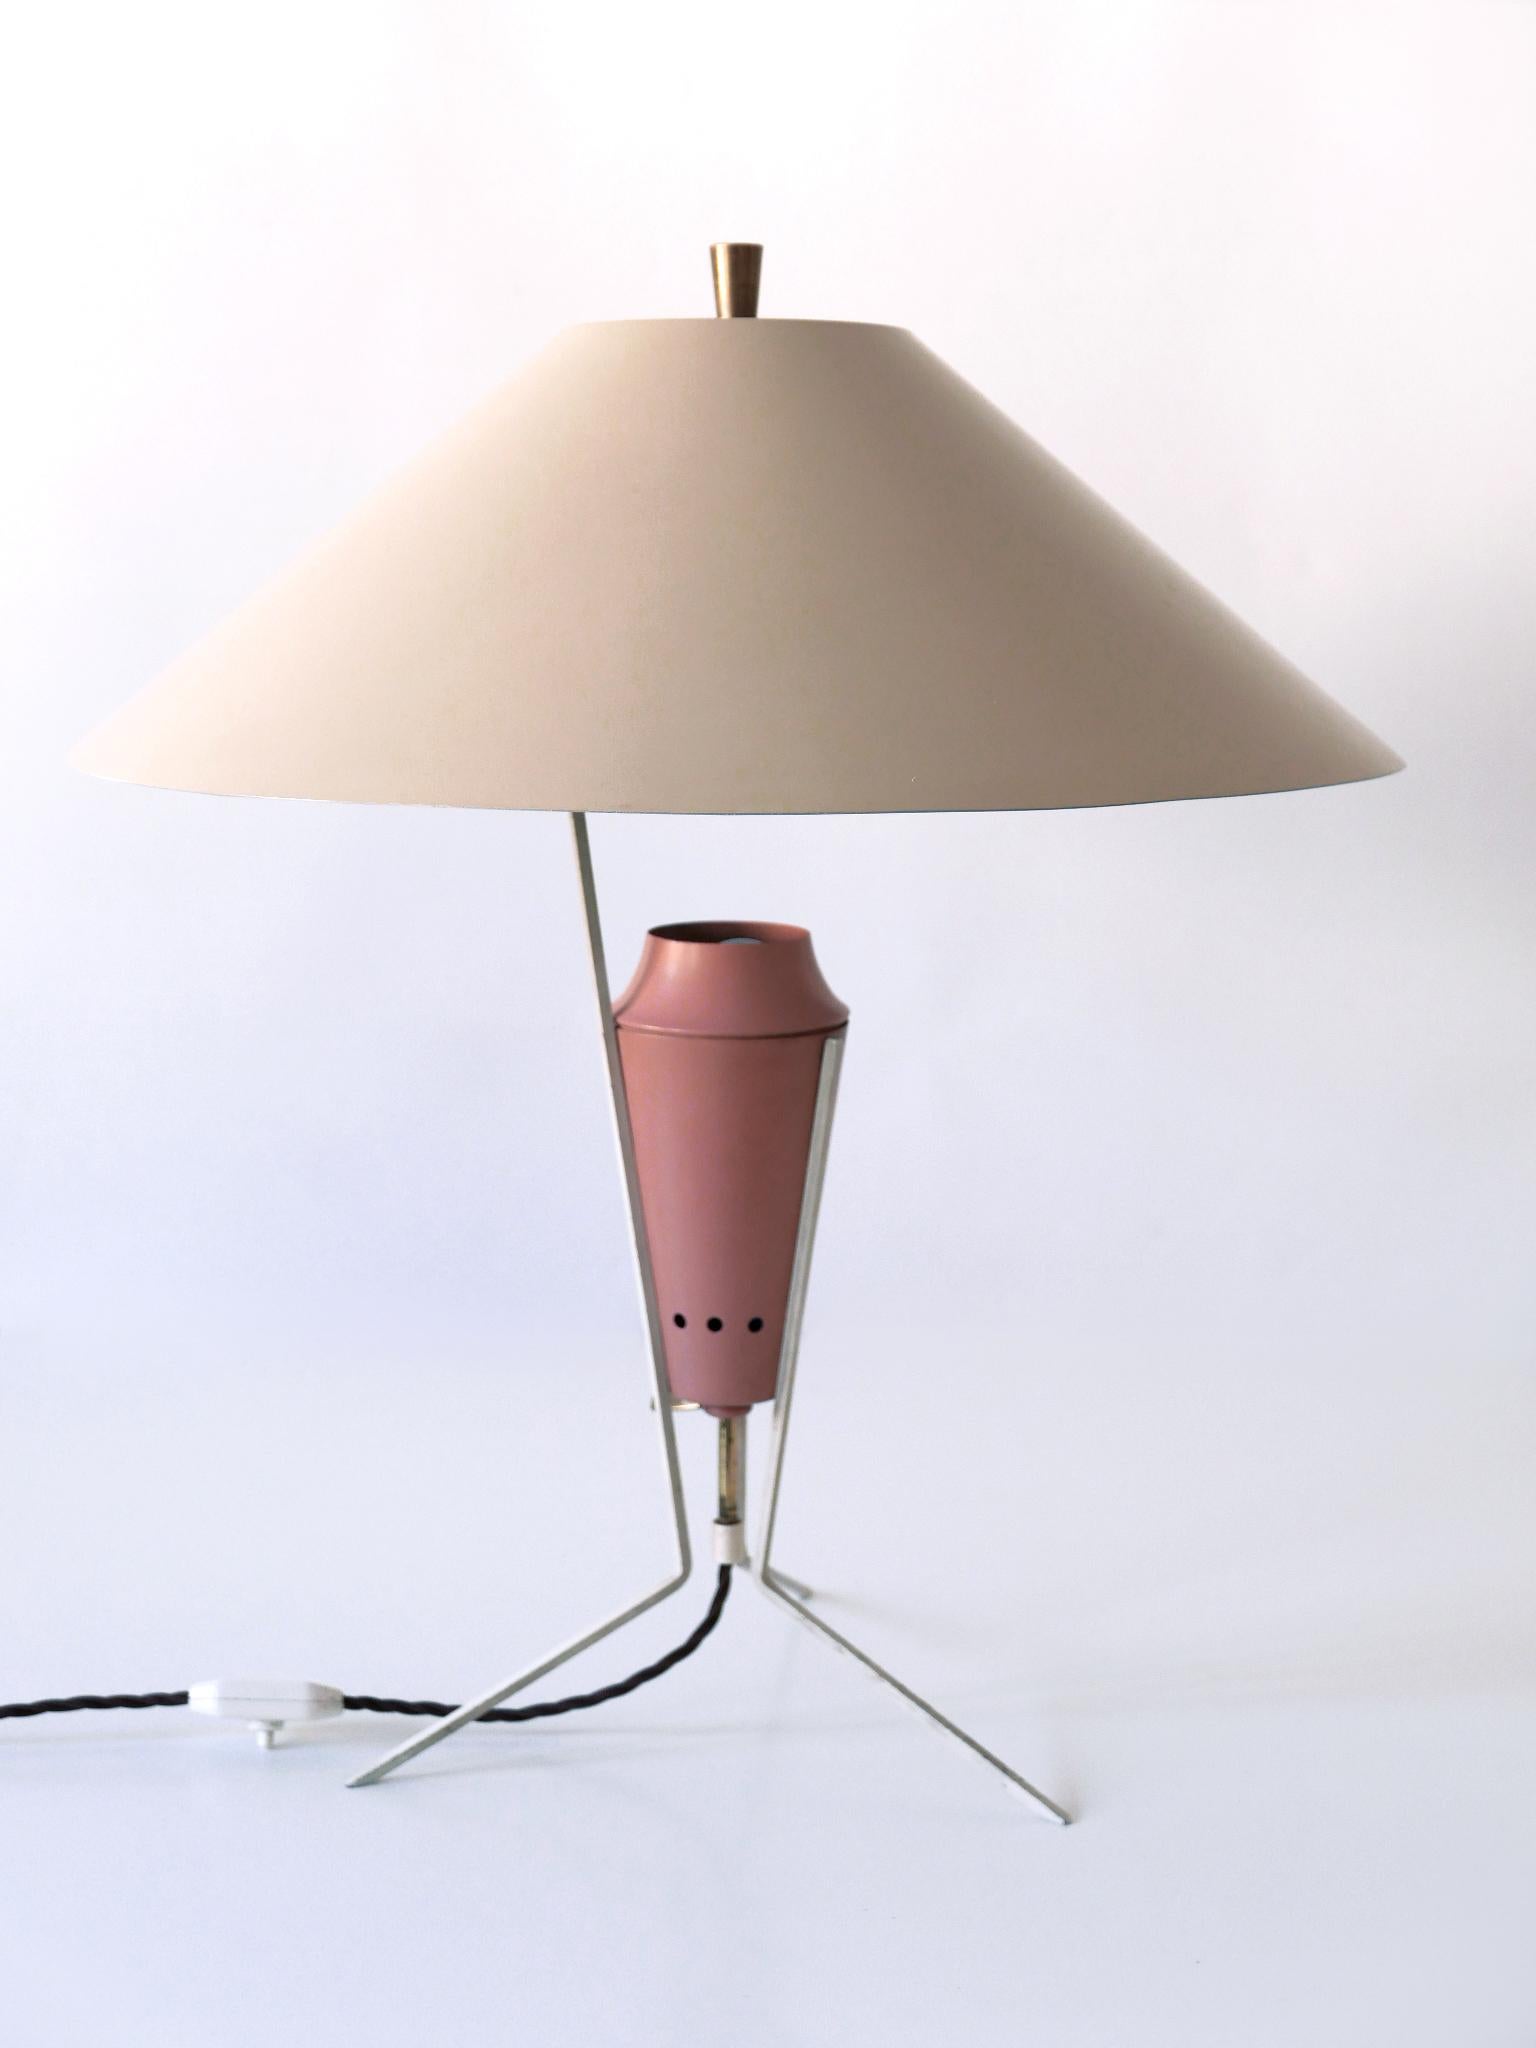 Exceptional Large & Elegant Mid Century Modern Table Lamp Germany 1950s For Sale 1